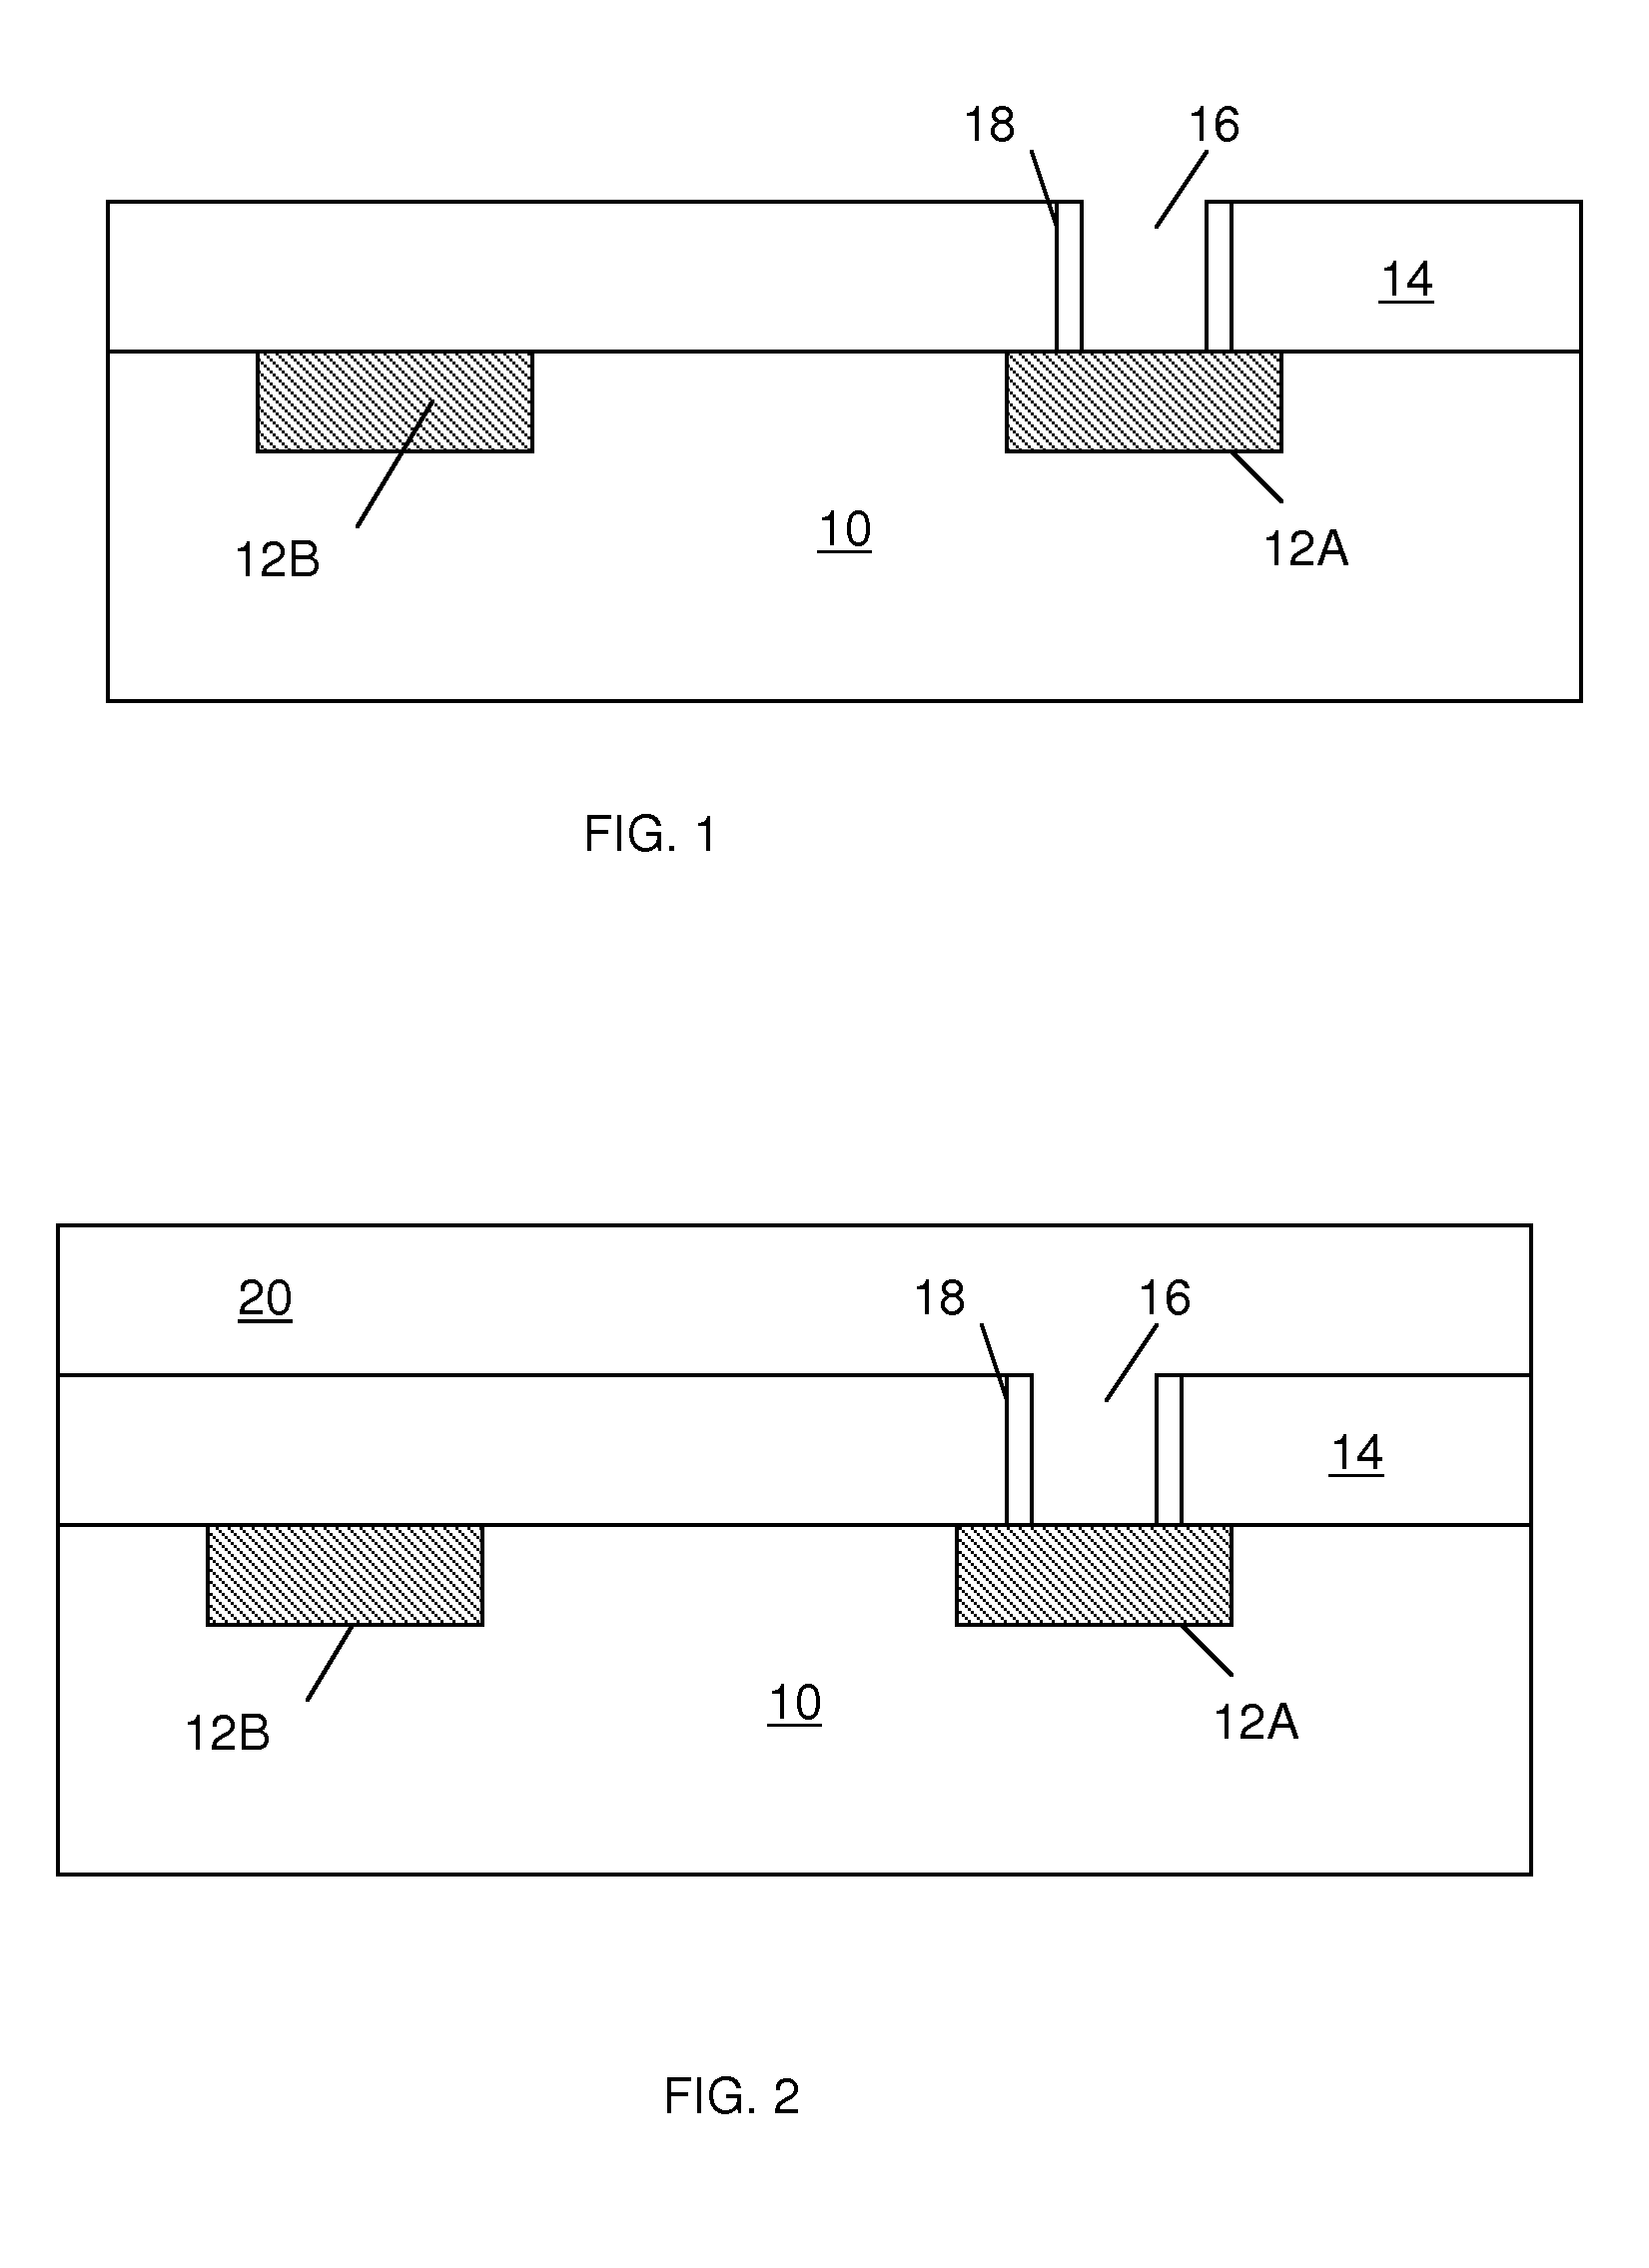 Three dimensional vertical e-fuse structures and methods of manufacturing the same